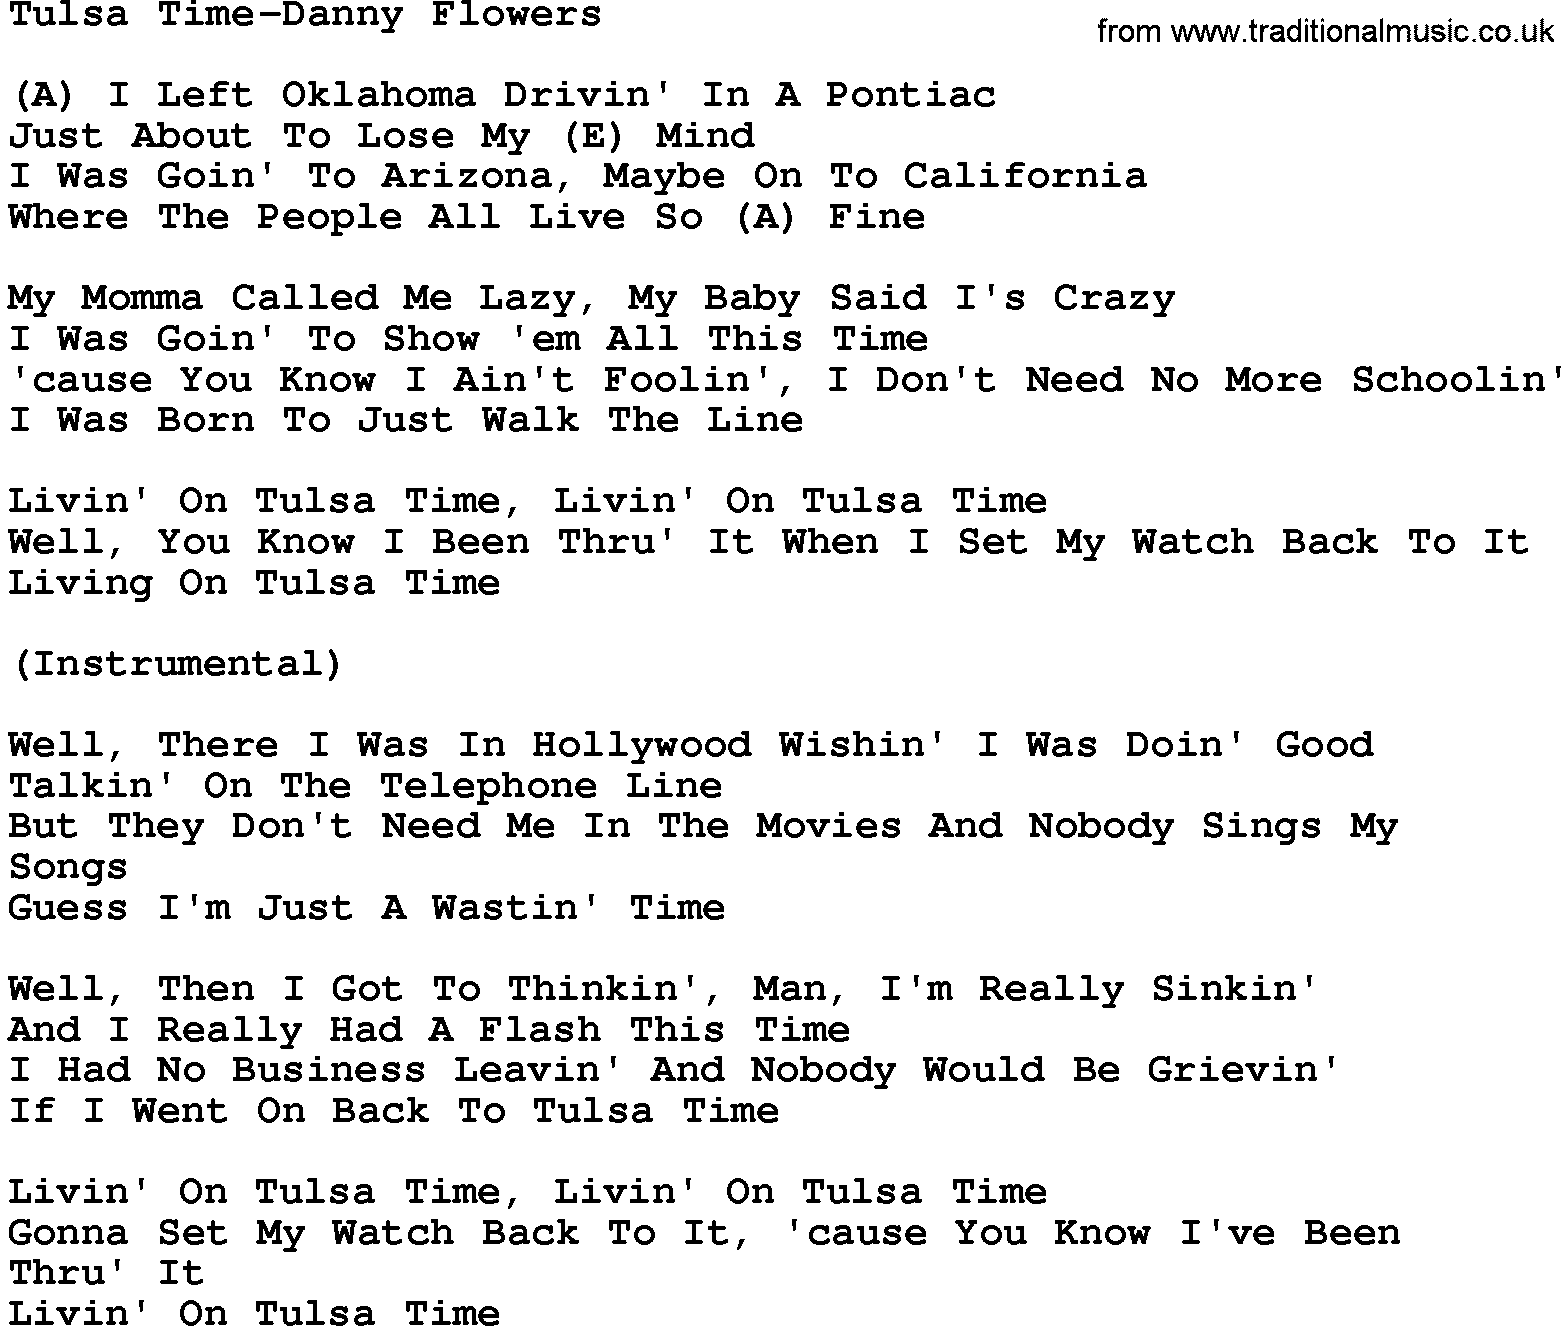 Country music song: Tulsa Time-Danny Flowers lyrics and chords